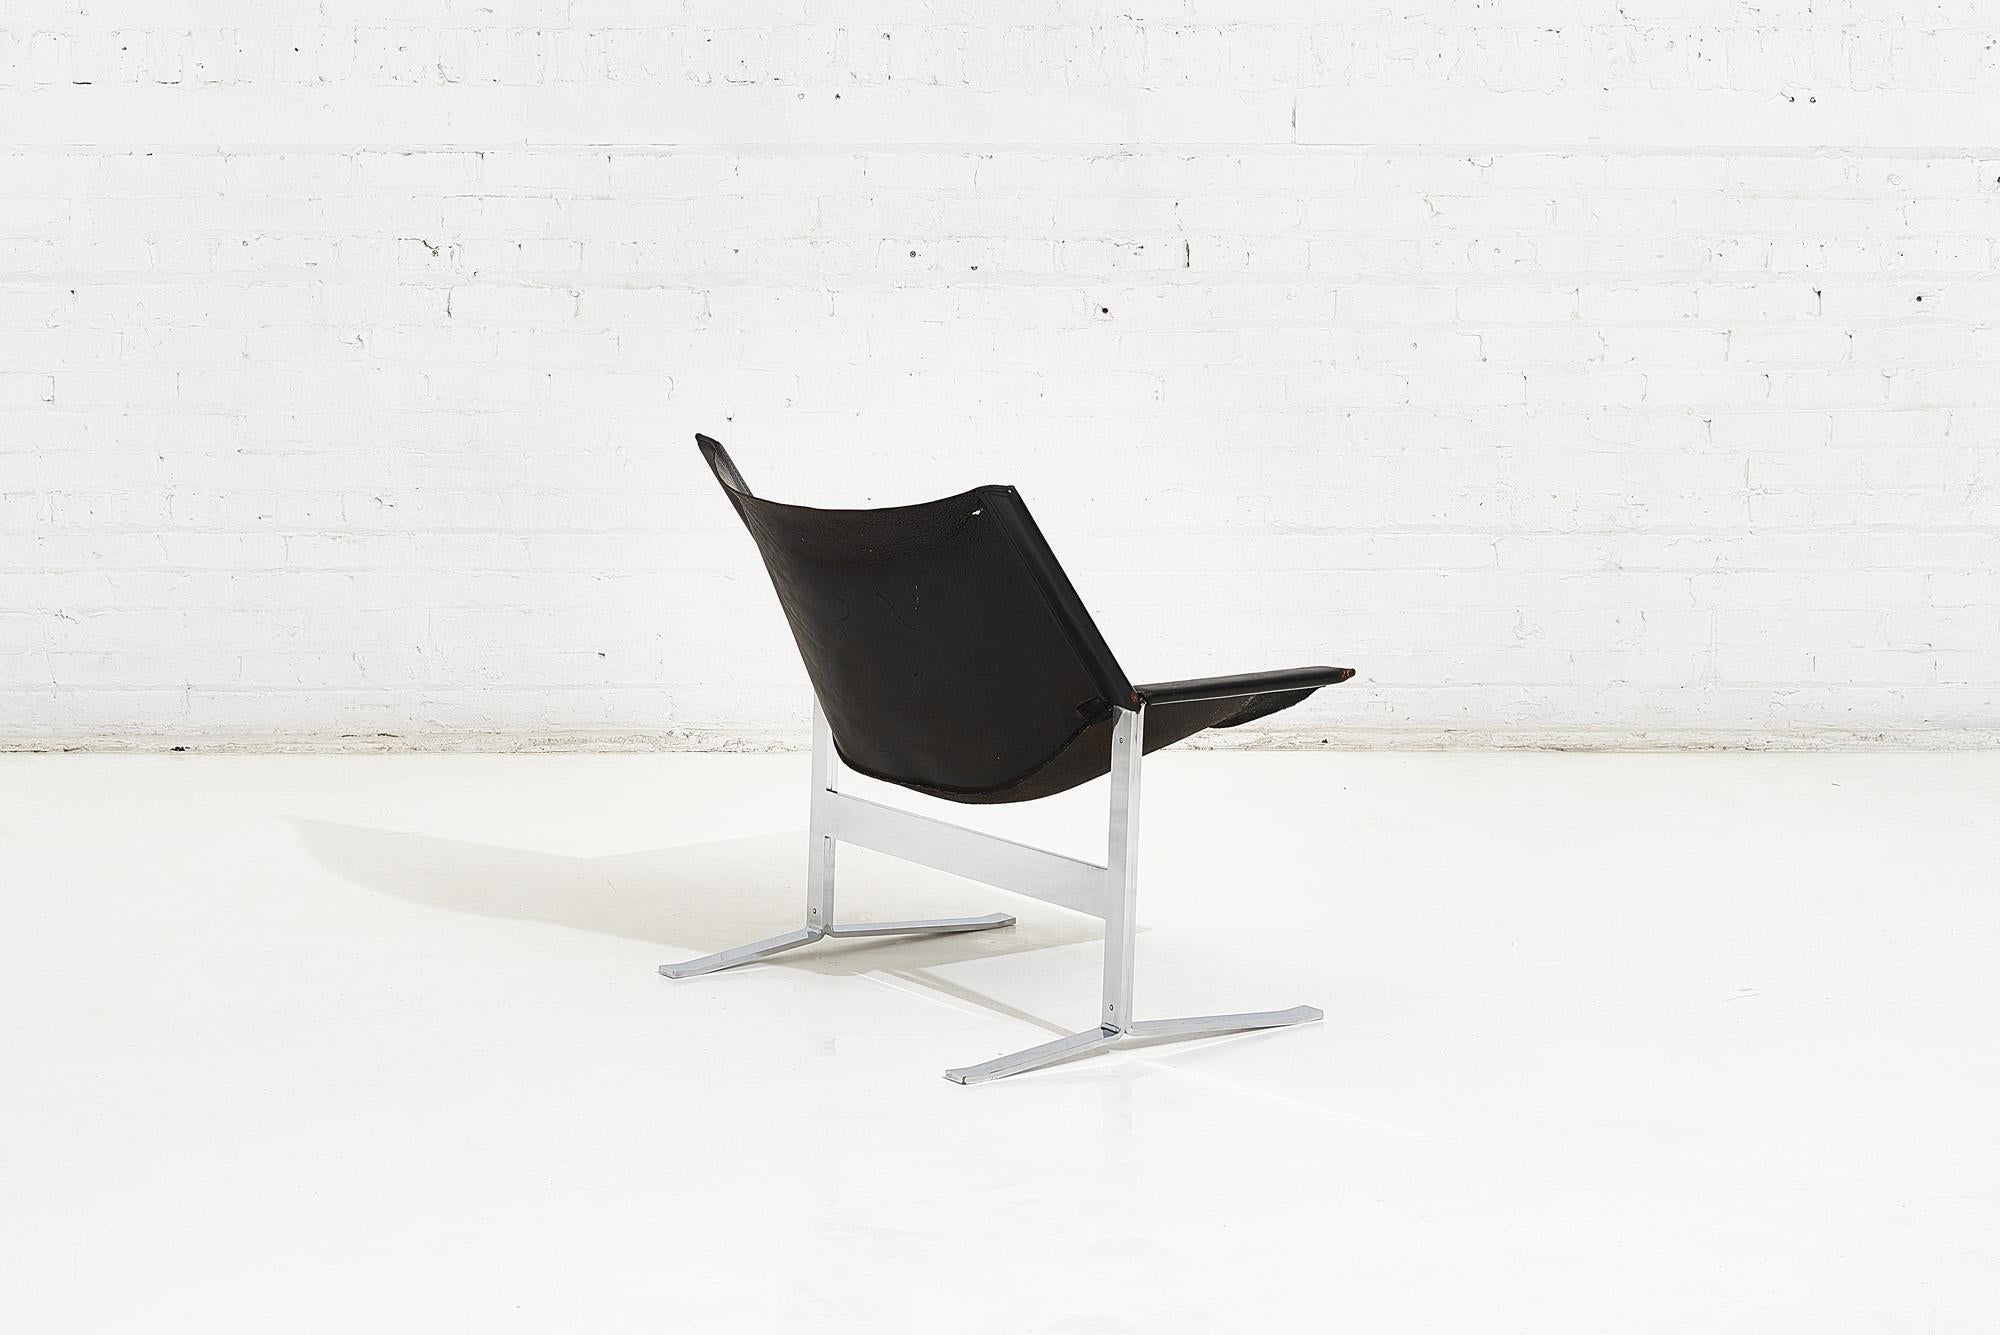 American Sling Chair Model 248 by Clement Meadmore, circa 1970